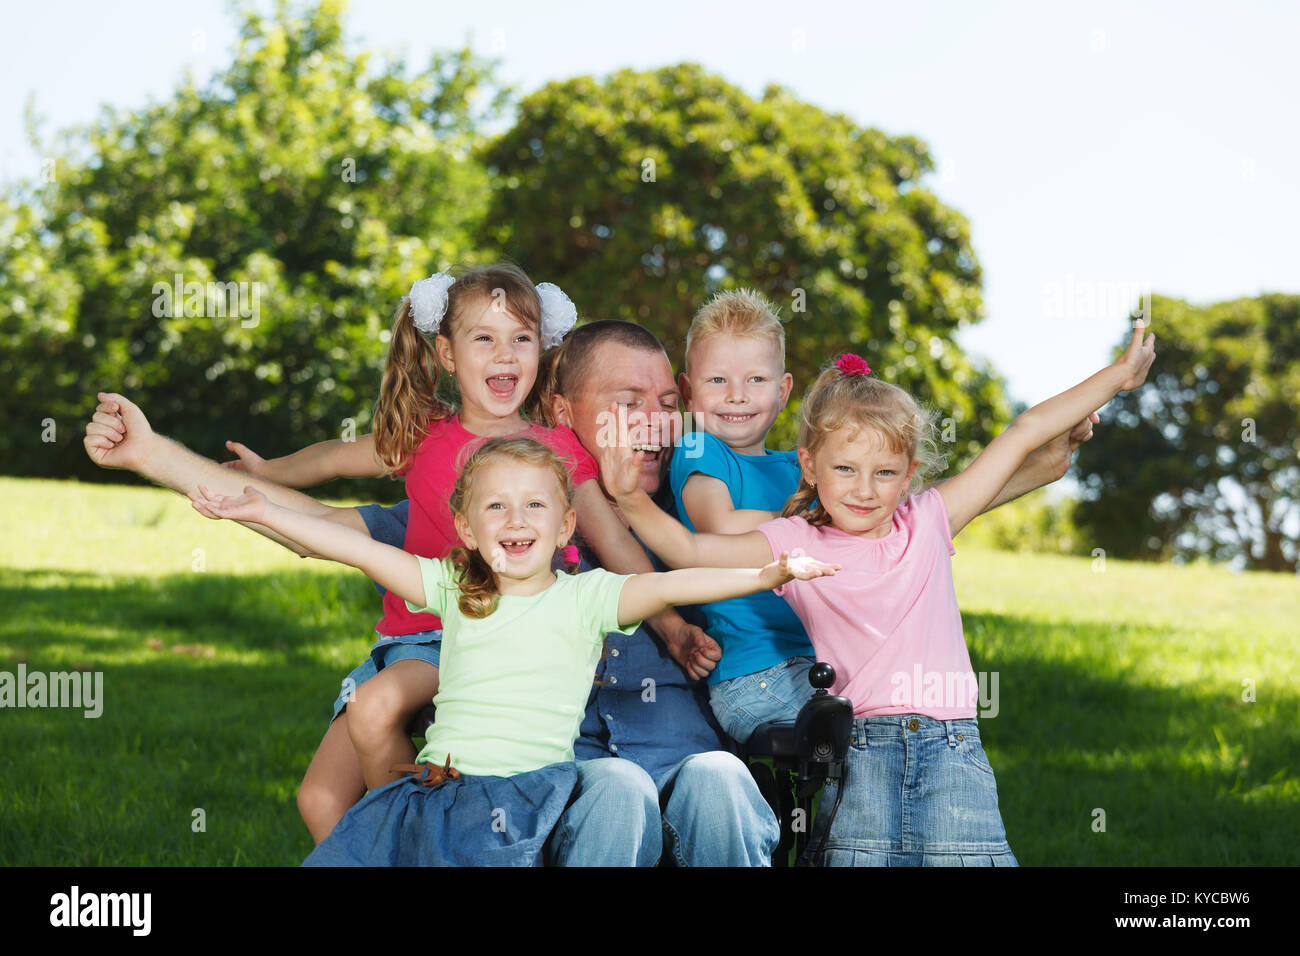 Disabled father with children showing freedom Stock Photo